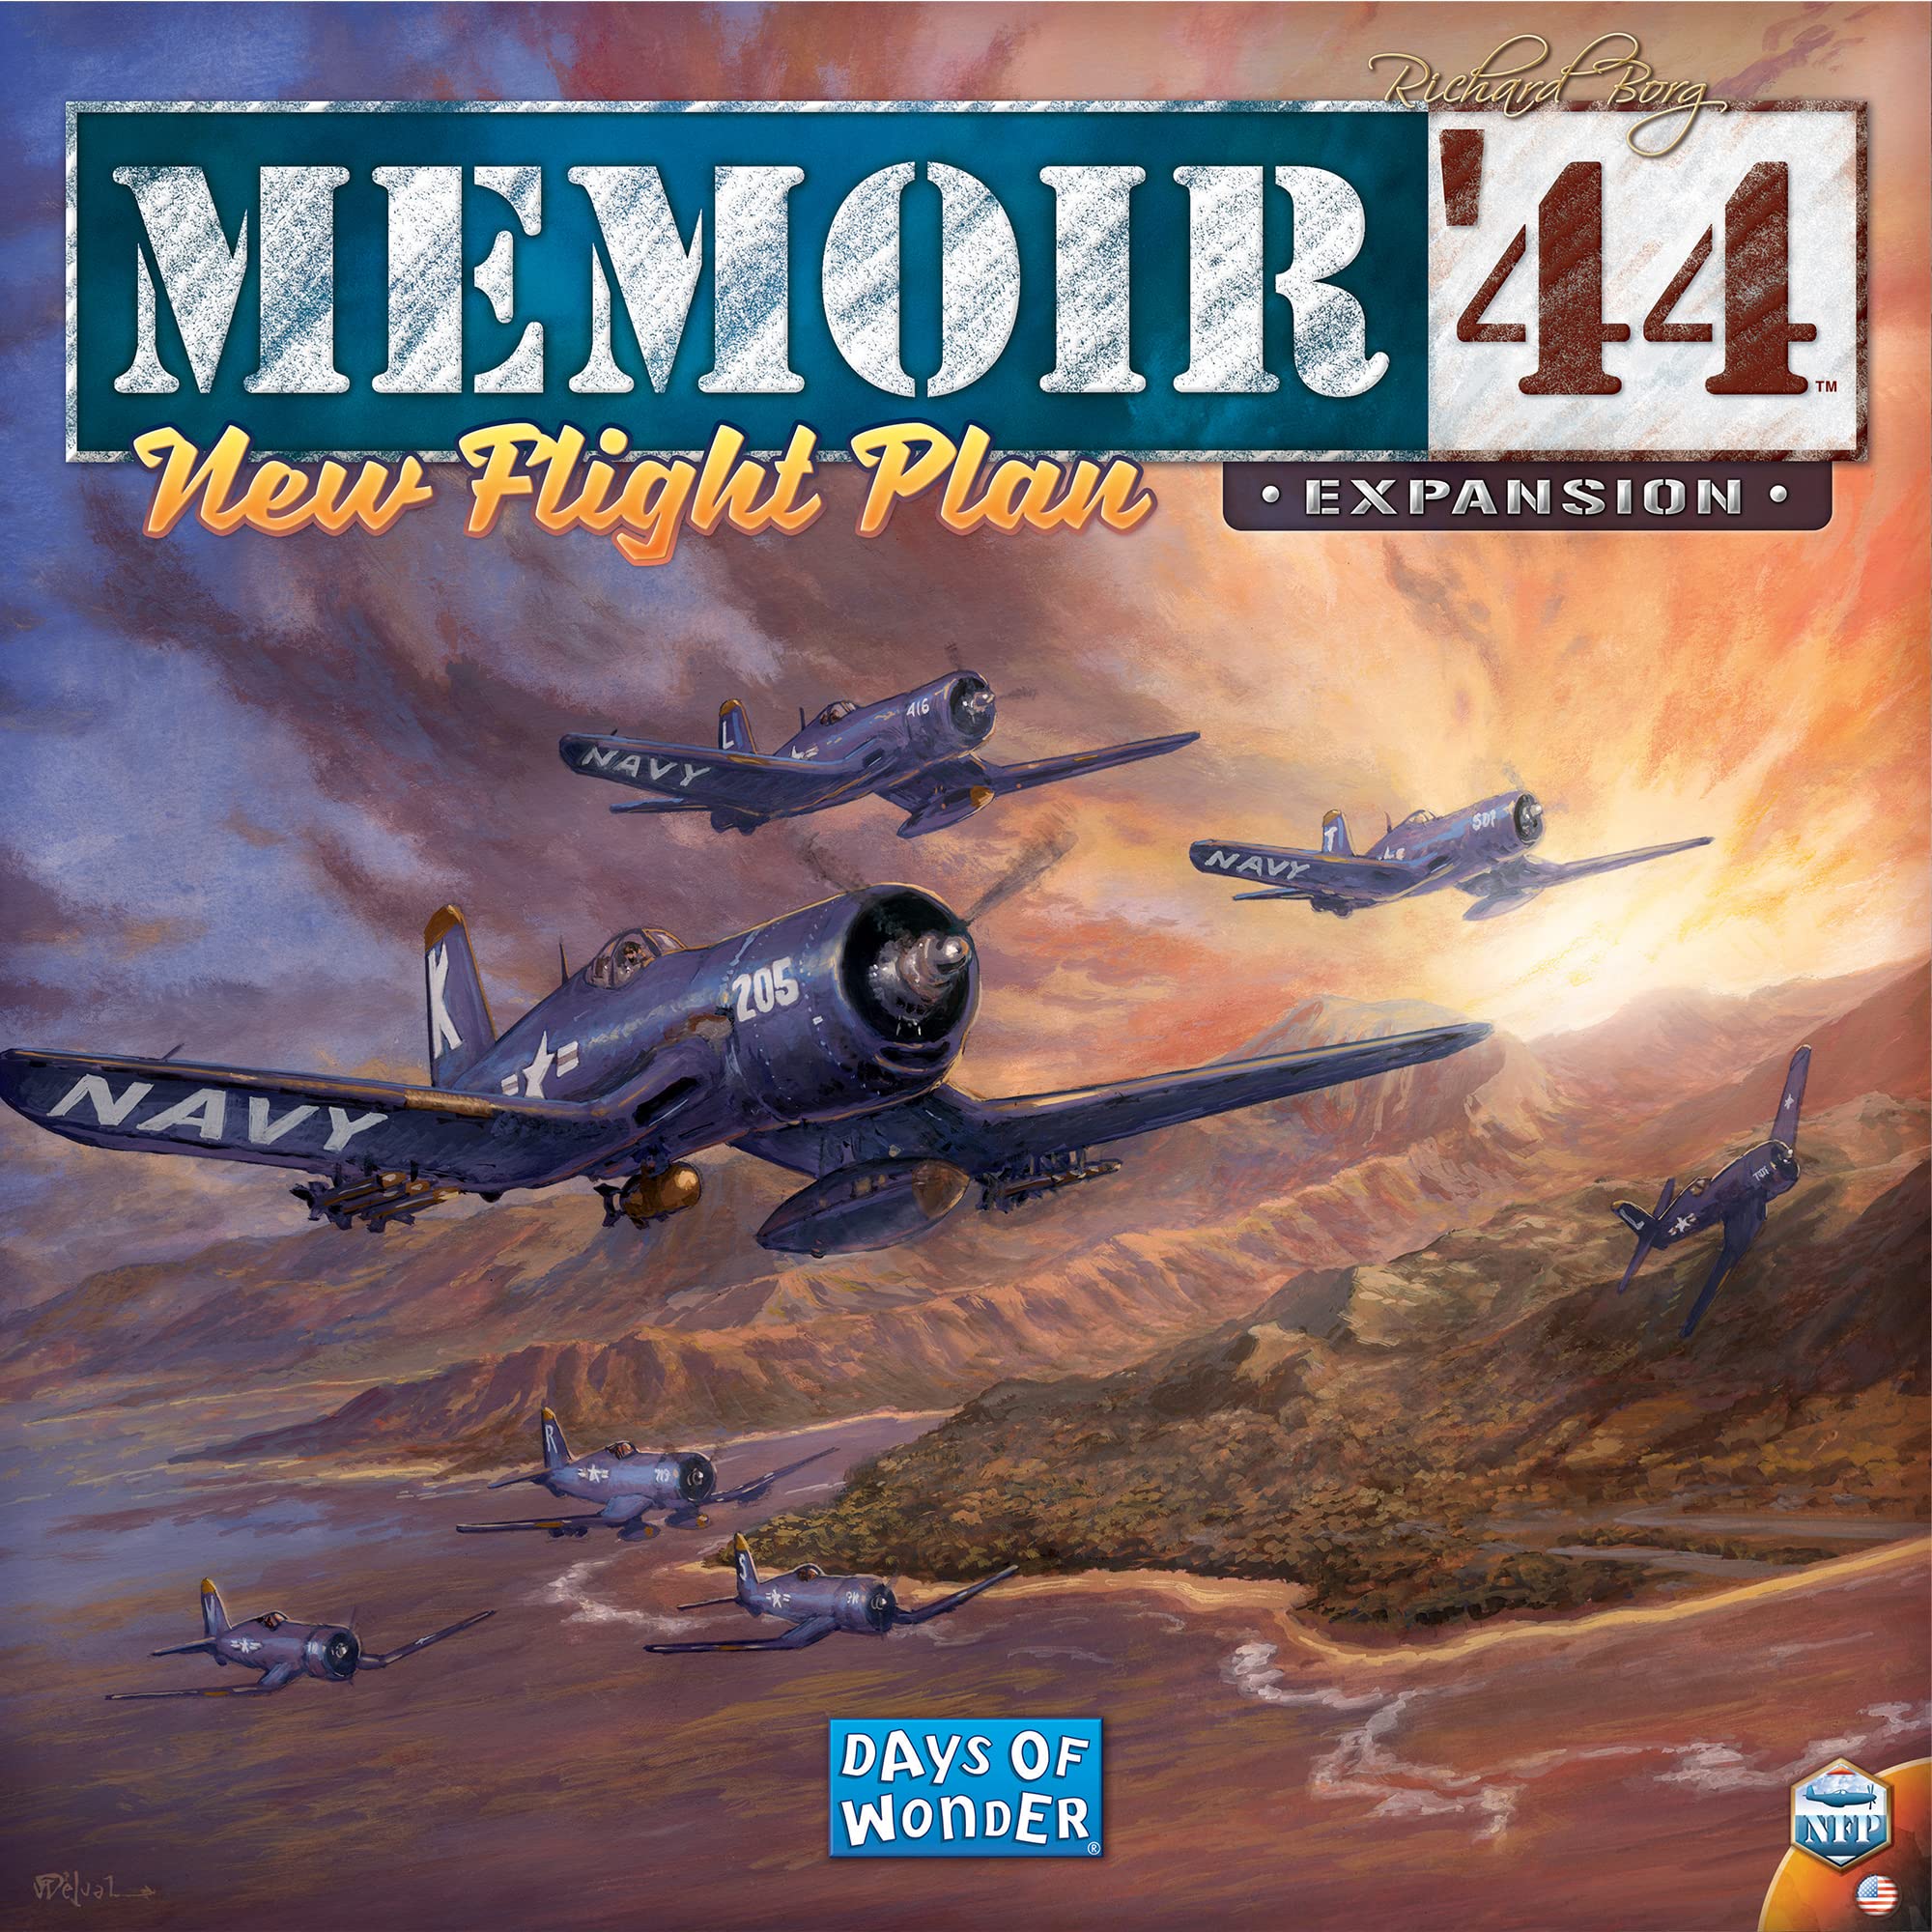 Memoir '44 New Flight Plan Board Game Expansion | Historical Miniatures Battle Game | Strategy Game for Adults & Kids | Ages 8+ | 2 Players | Avg. Playtime 30-60 Mins | Made by Days of Wonder